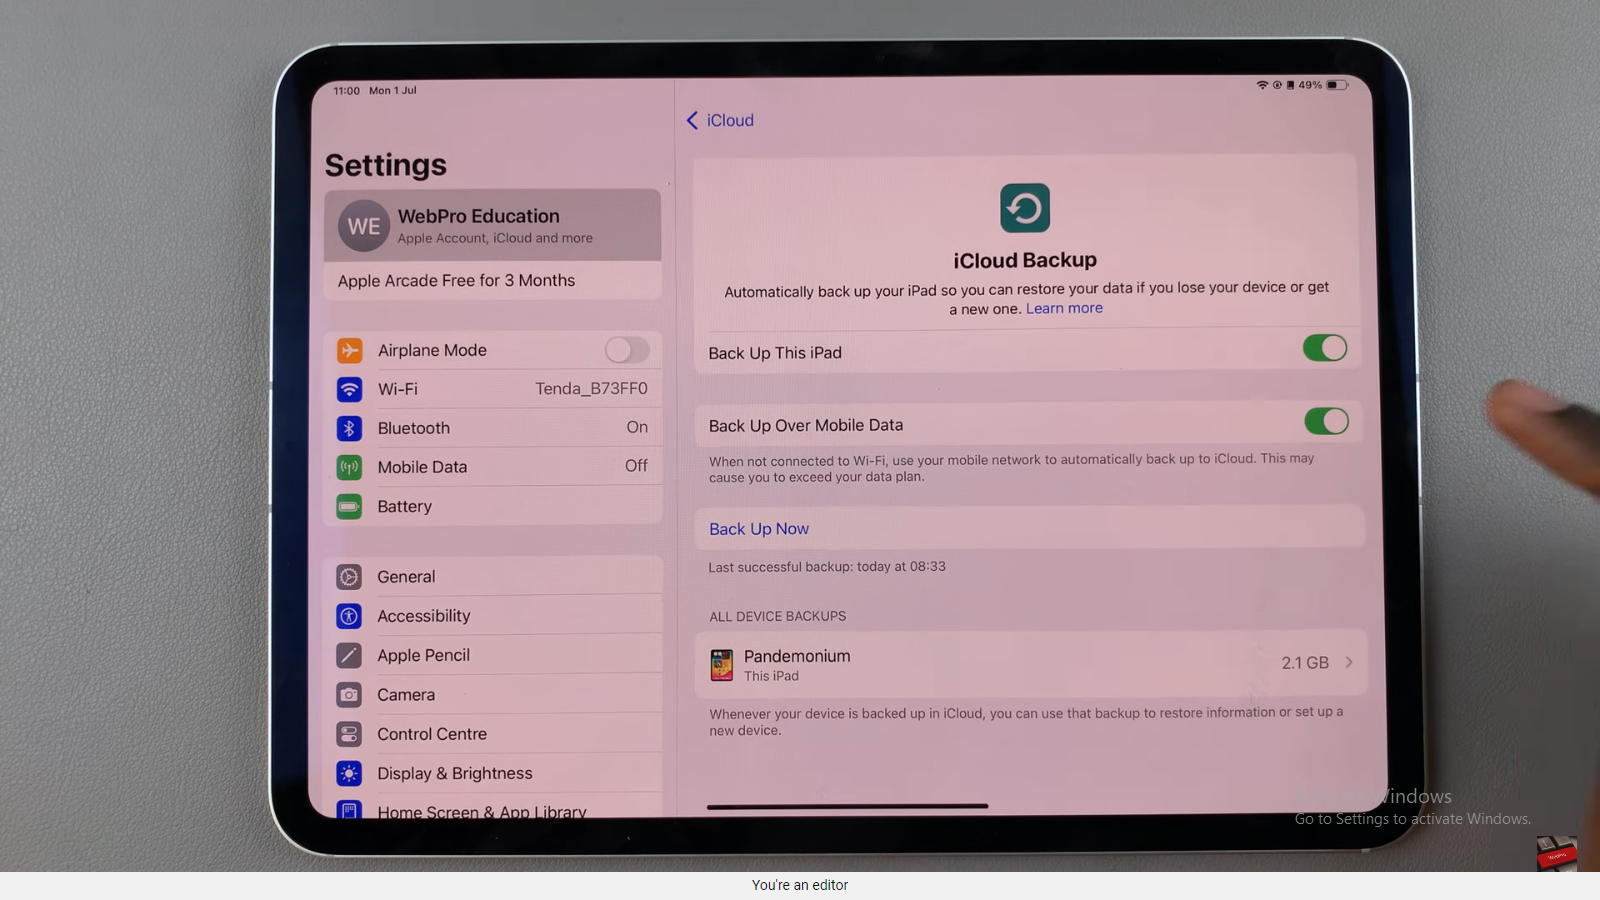 How To ‘Enable Back Up Over Mobile Data’ On iPad